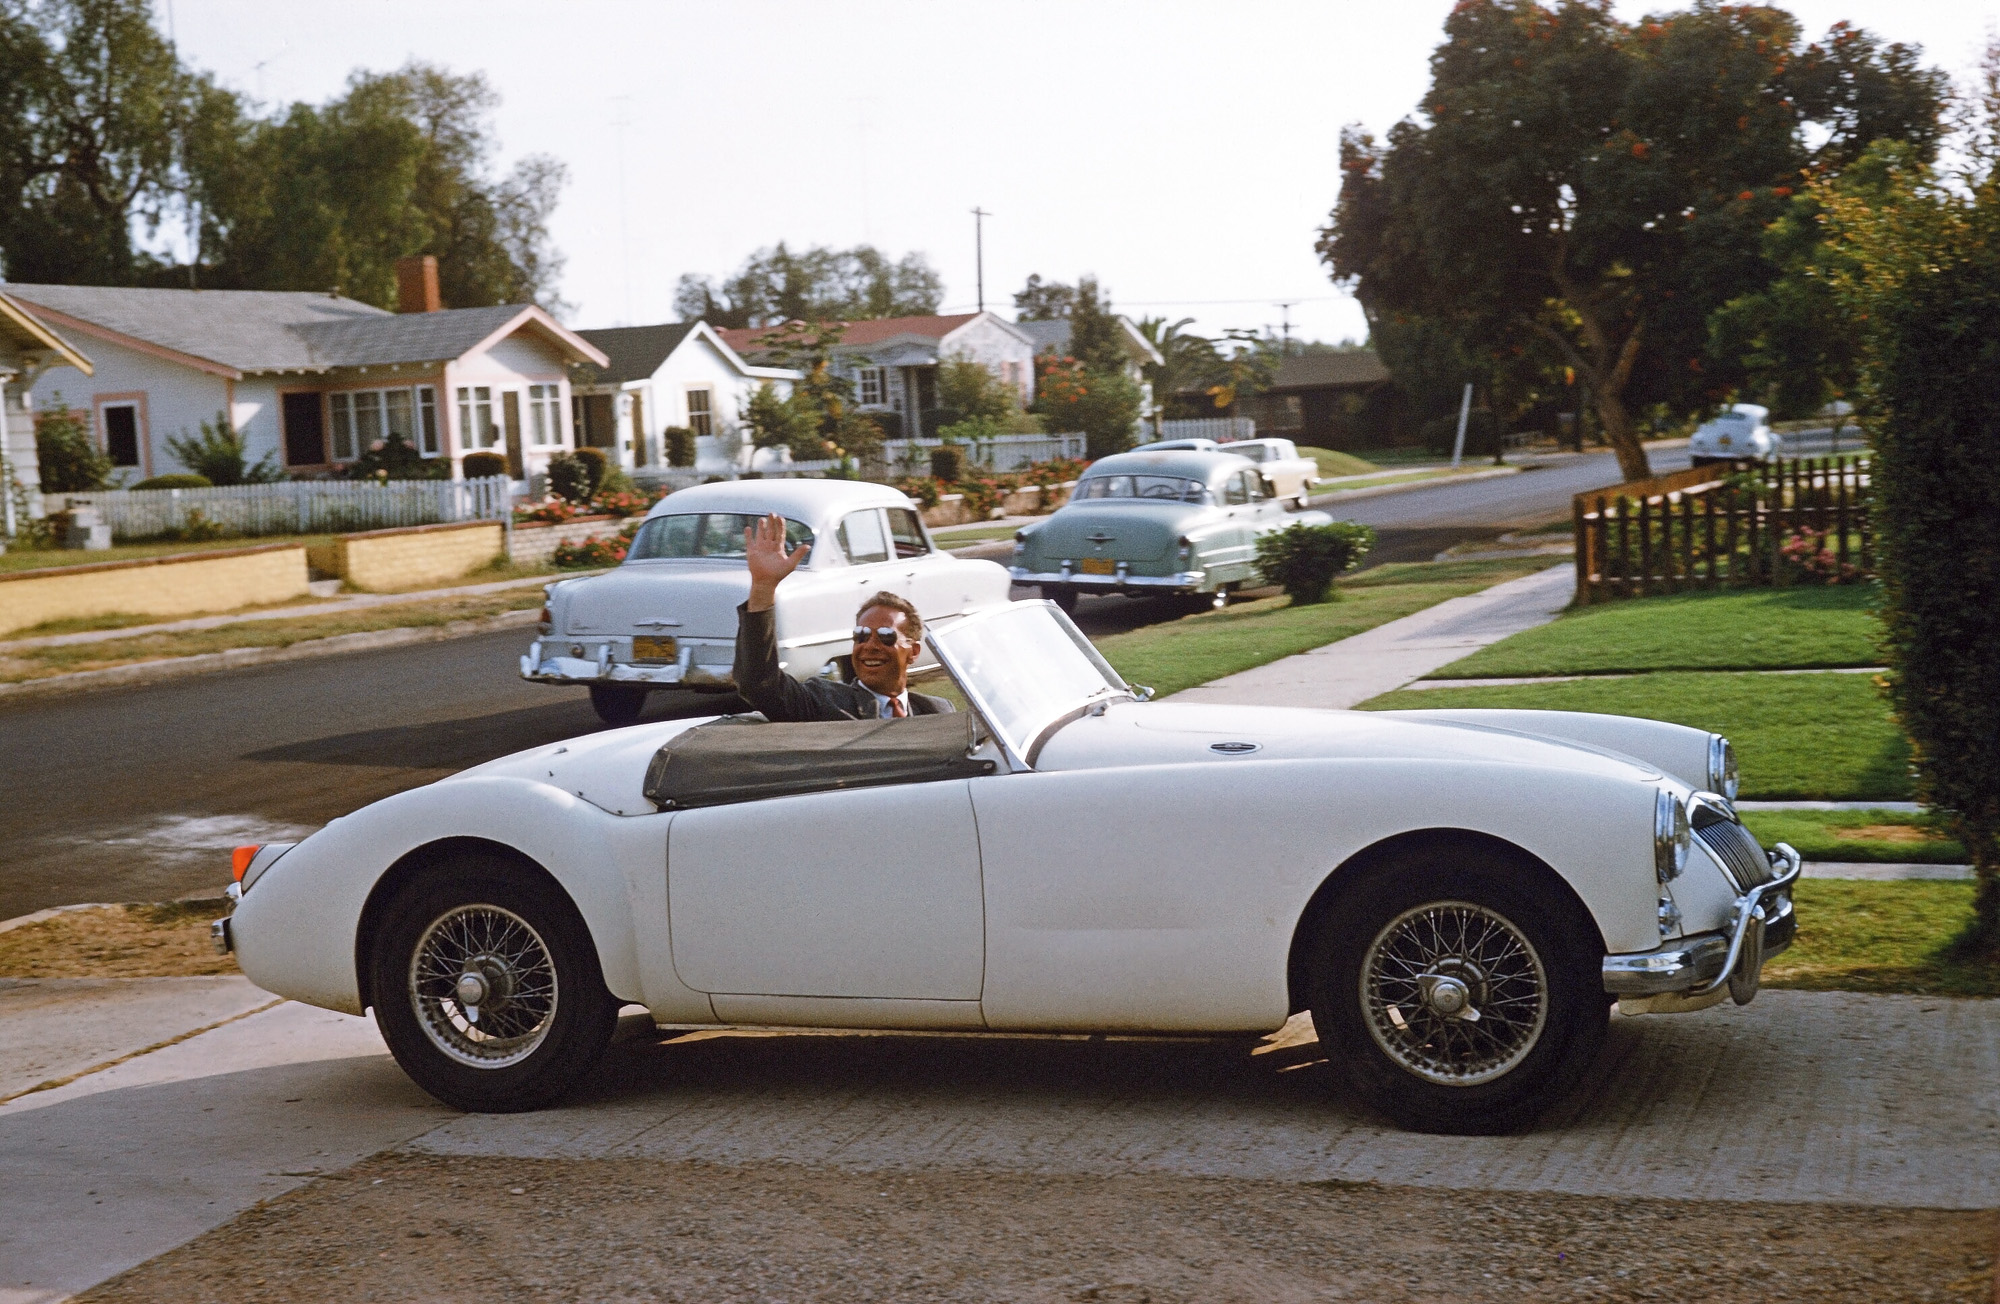 Chula Vista, California, 1958. Grandpa Fred in his MGA on Madrona Street. Photo by my father, home on leave after his second year at West Point. View full size.